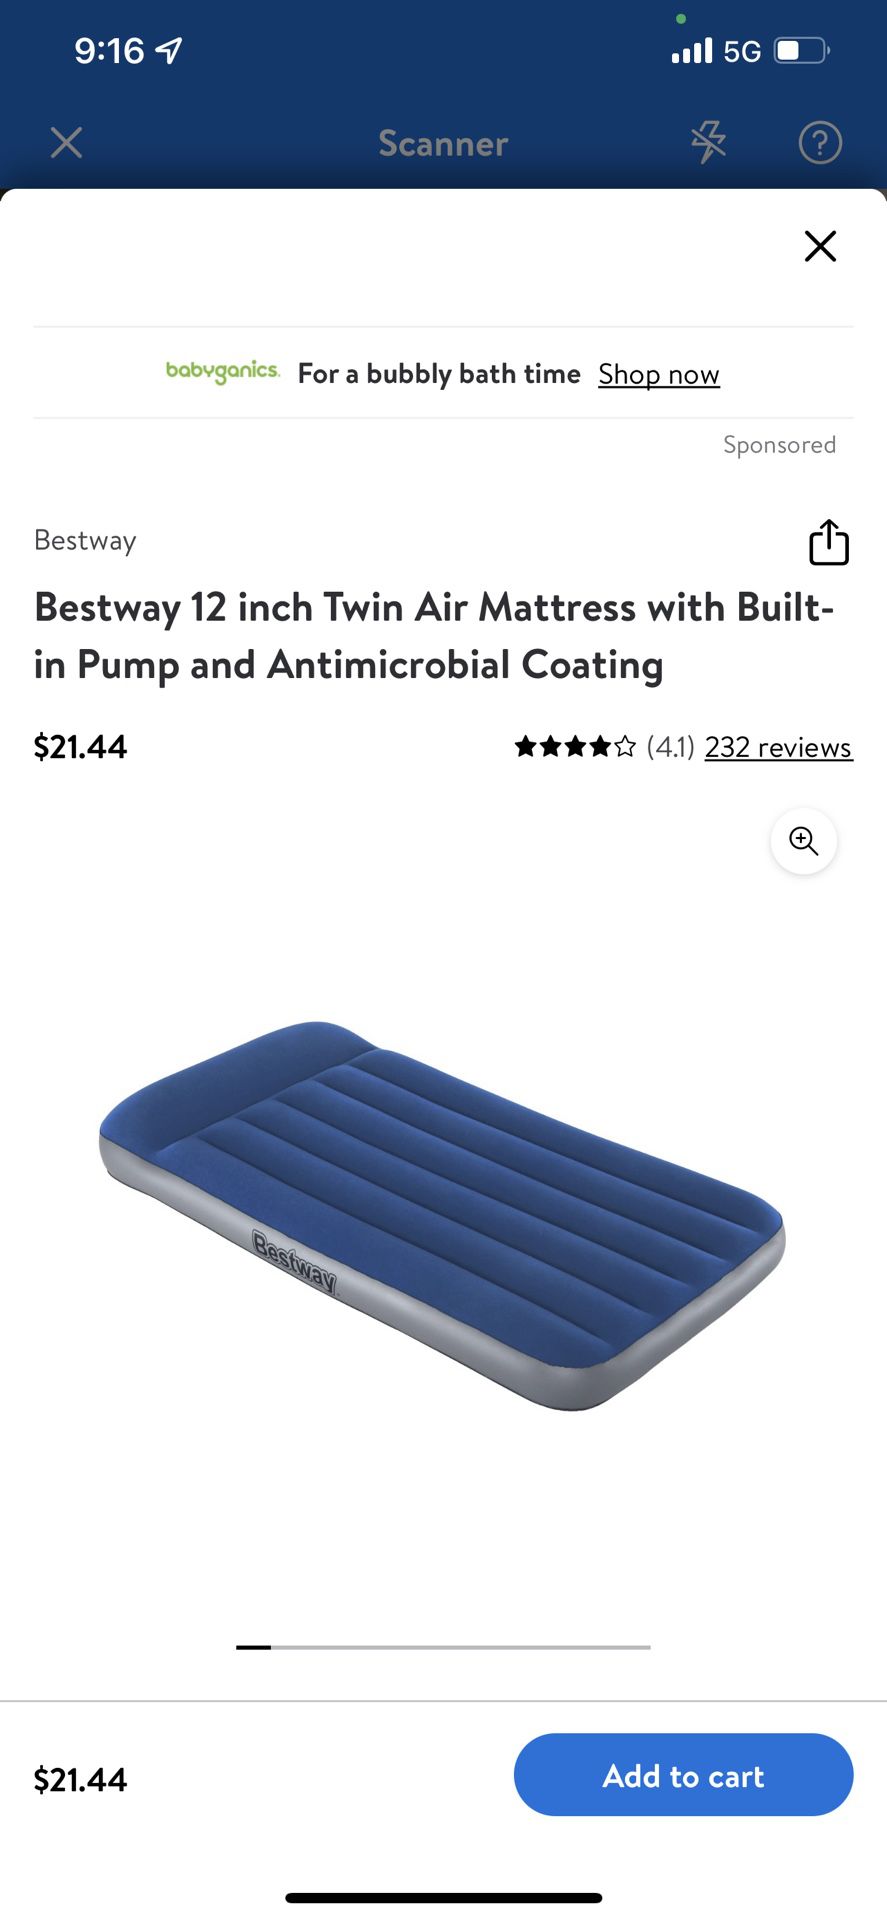 Bestway 12 inch Twin Air Mattress with Built- in Pump and Antimicrobial Coating